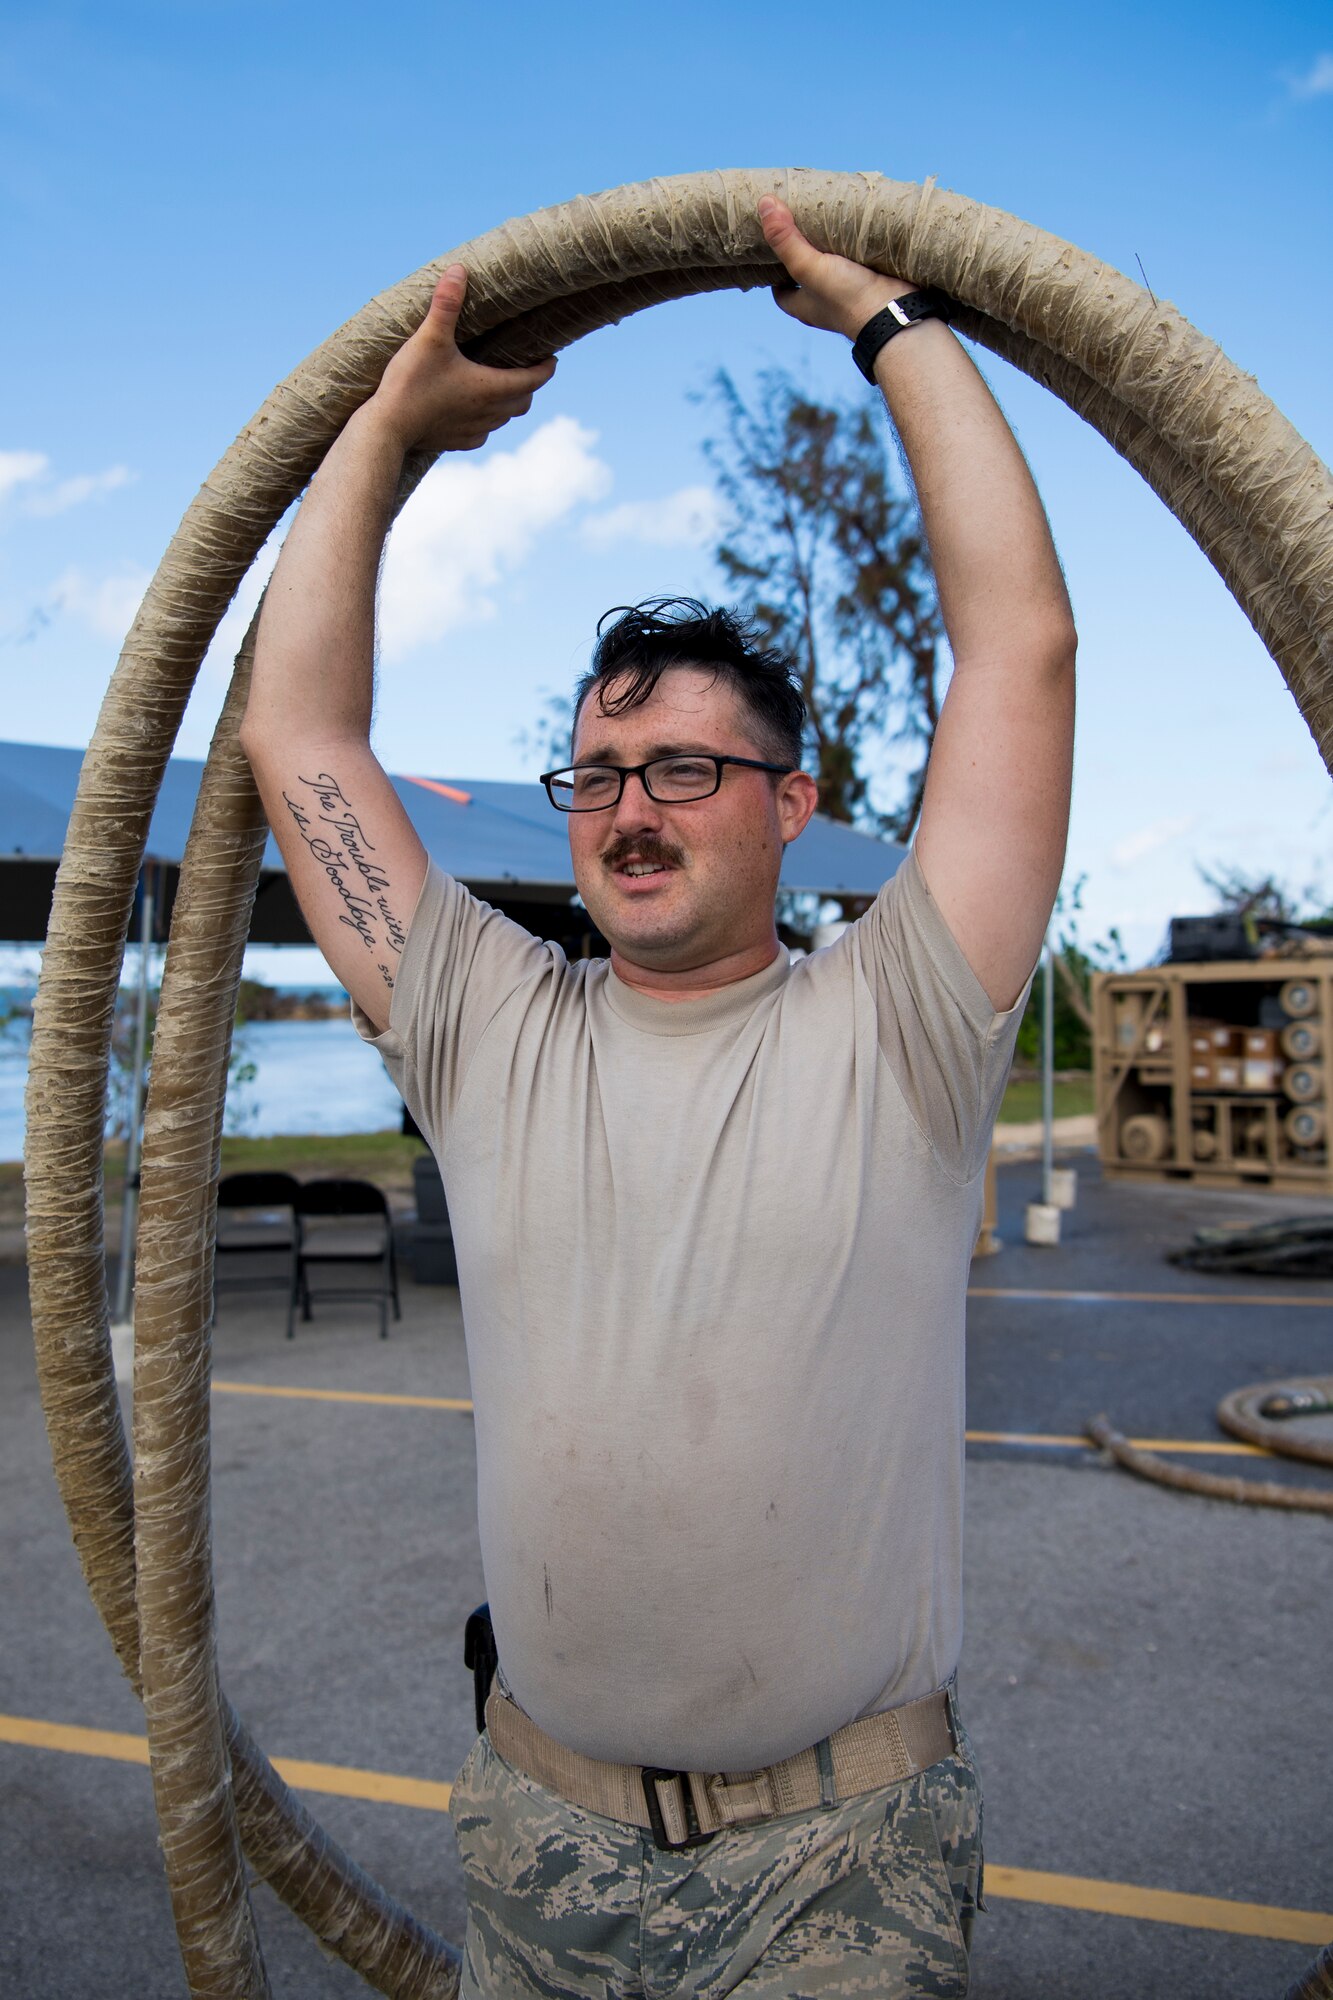 Senior Airman John McGovney, 36th Civil Engineer Squadron water and fuel systems maintainer assigned to Andersen Air Base, Guam, carries a hose during reverse osmosis water purification unit tear down on Saipan, Commonwealth of the Northern Mariana Islands, Nov. 21, 2018, as part of the Super Typhoon Yutu relief effort.